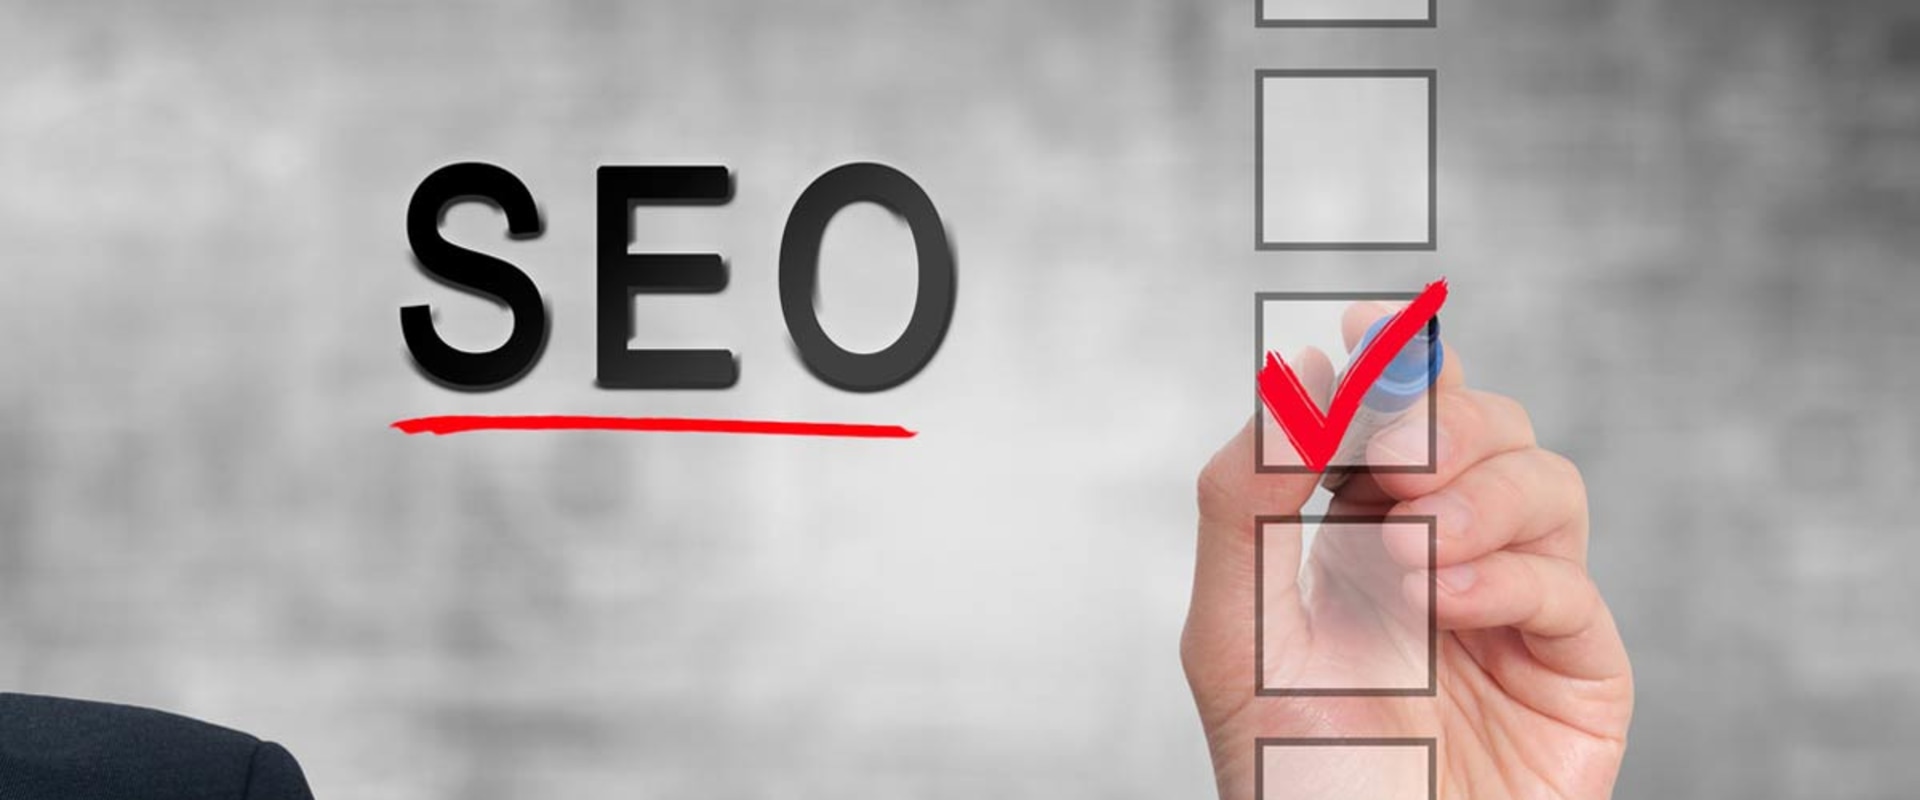 10 Essential SEO Tips for Beginners to Improve Your Website